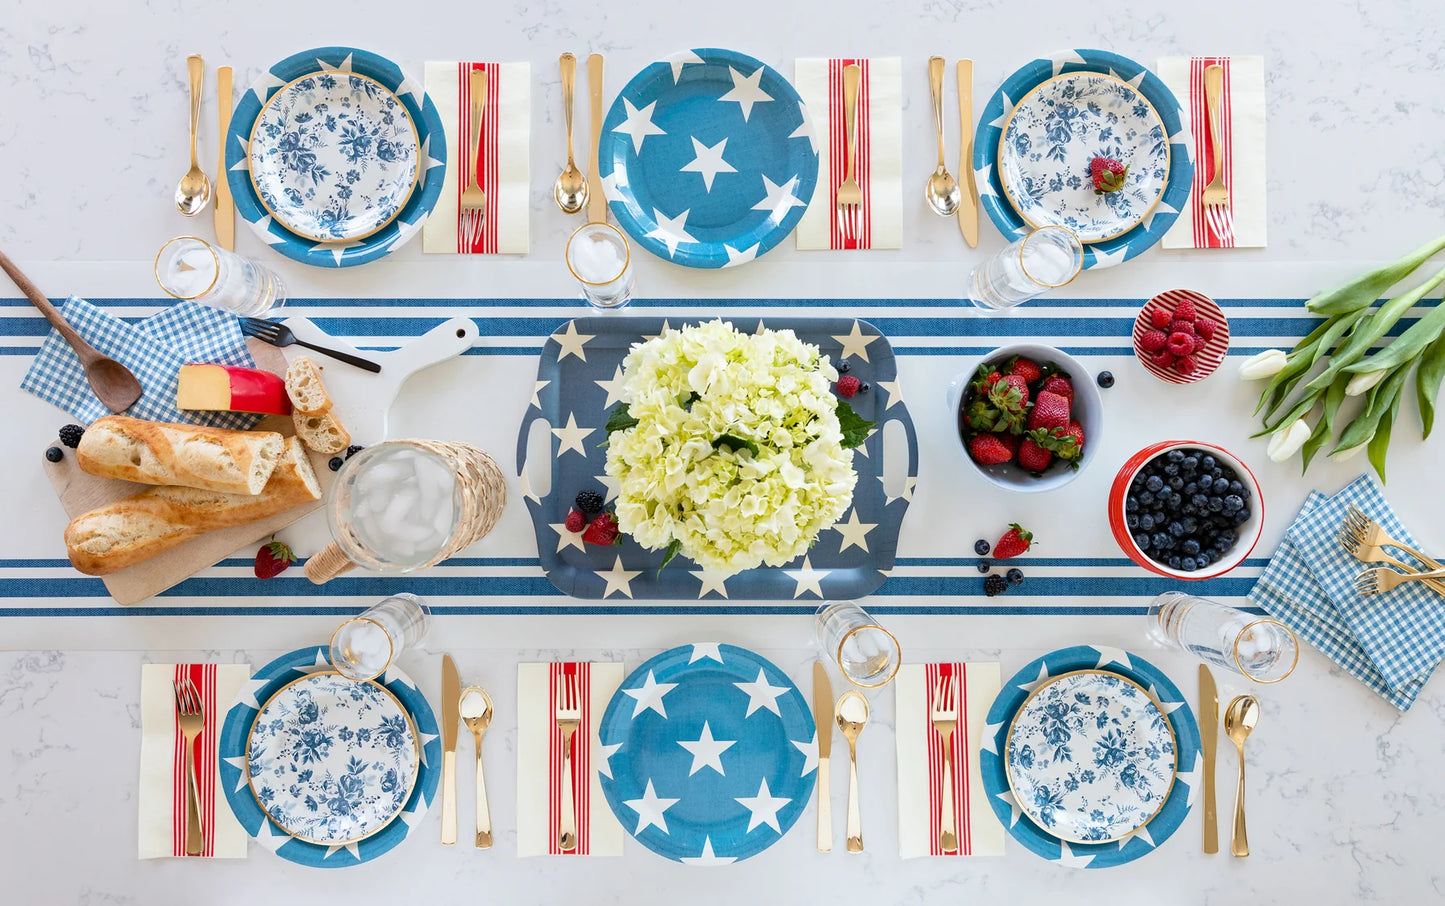 7" Paper Plate: Hamptons Navy Floral